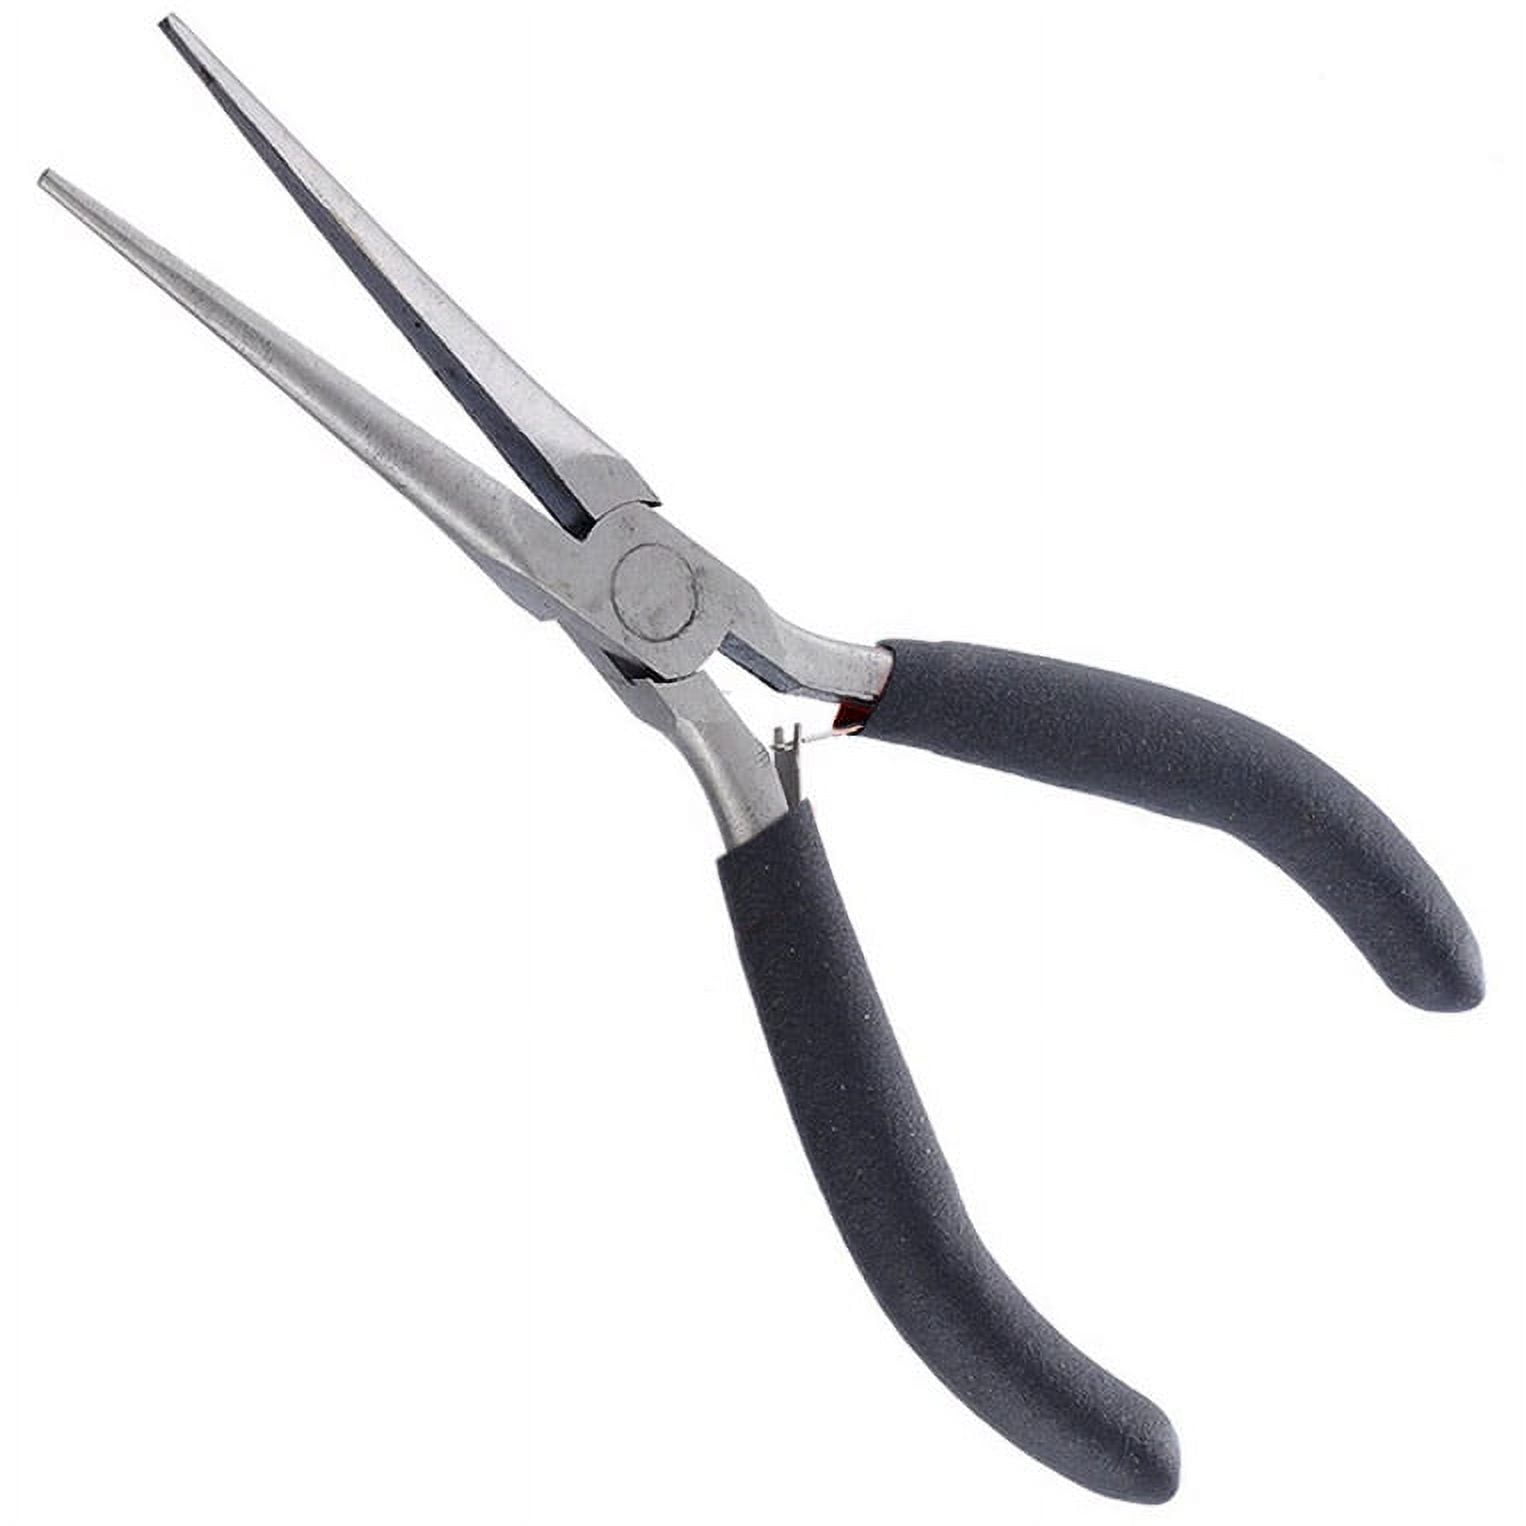 Needle Nose Pliers 5 1/2 one round 2mm tip delicate - Midwest Surgical